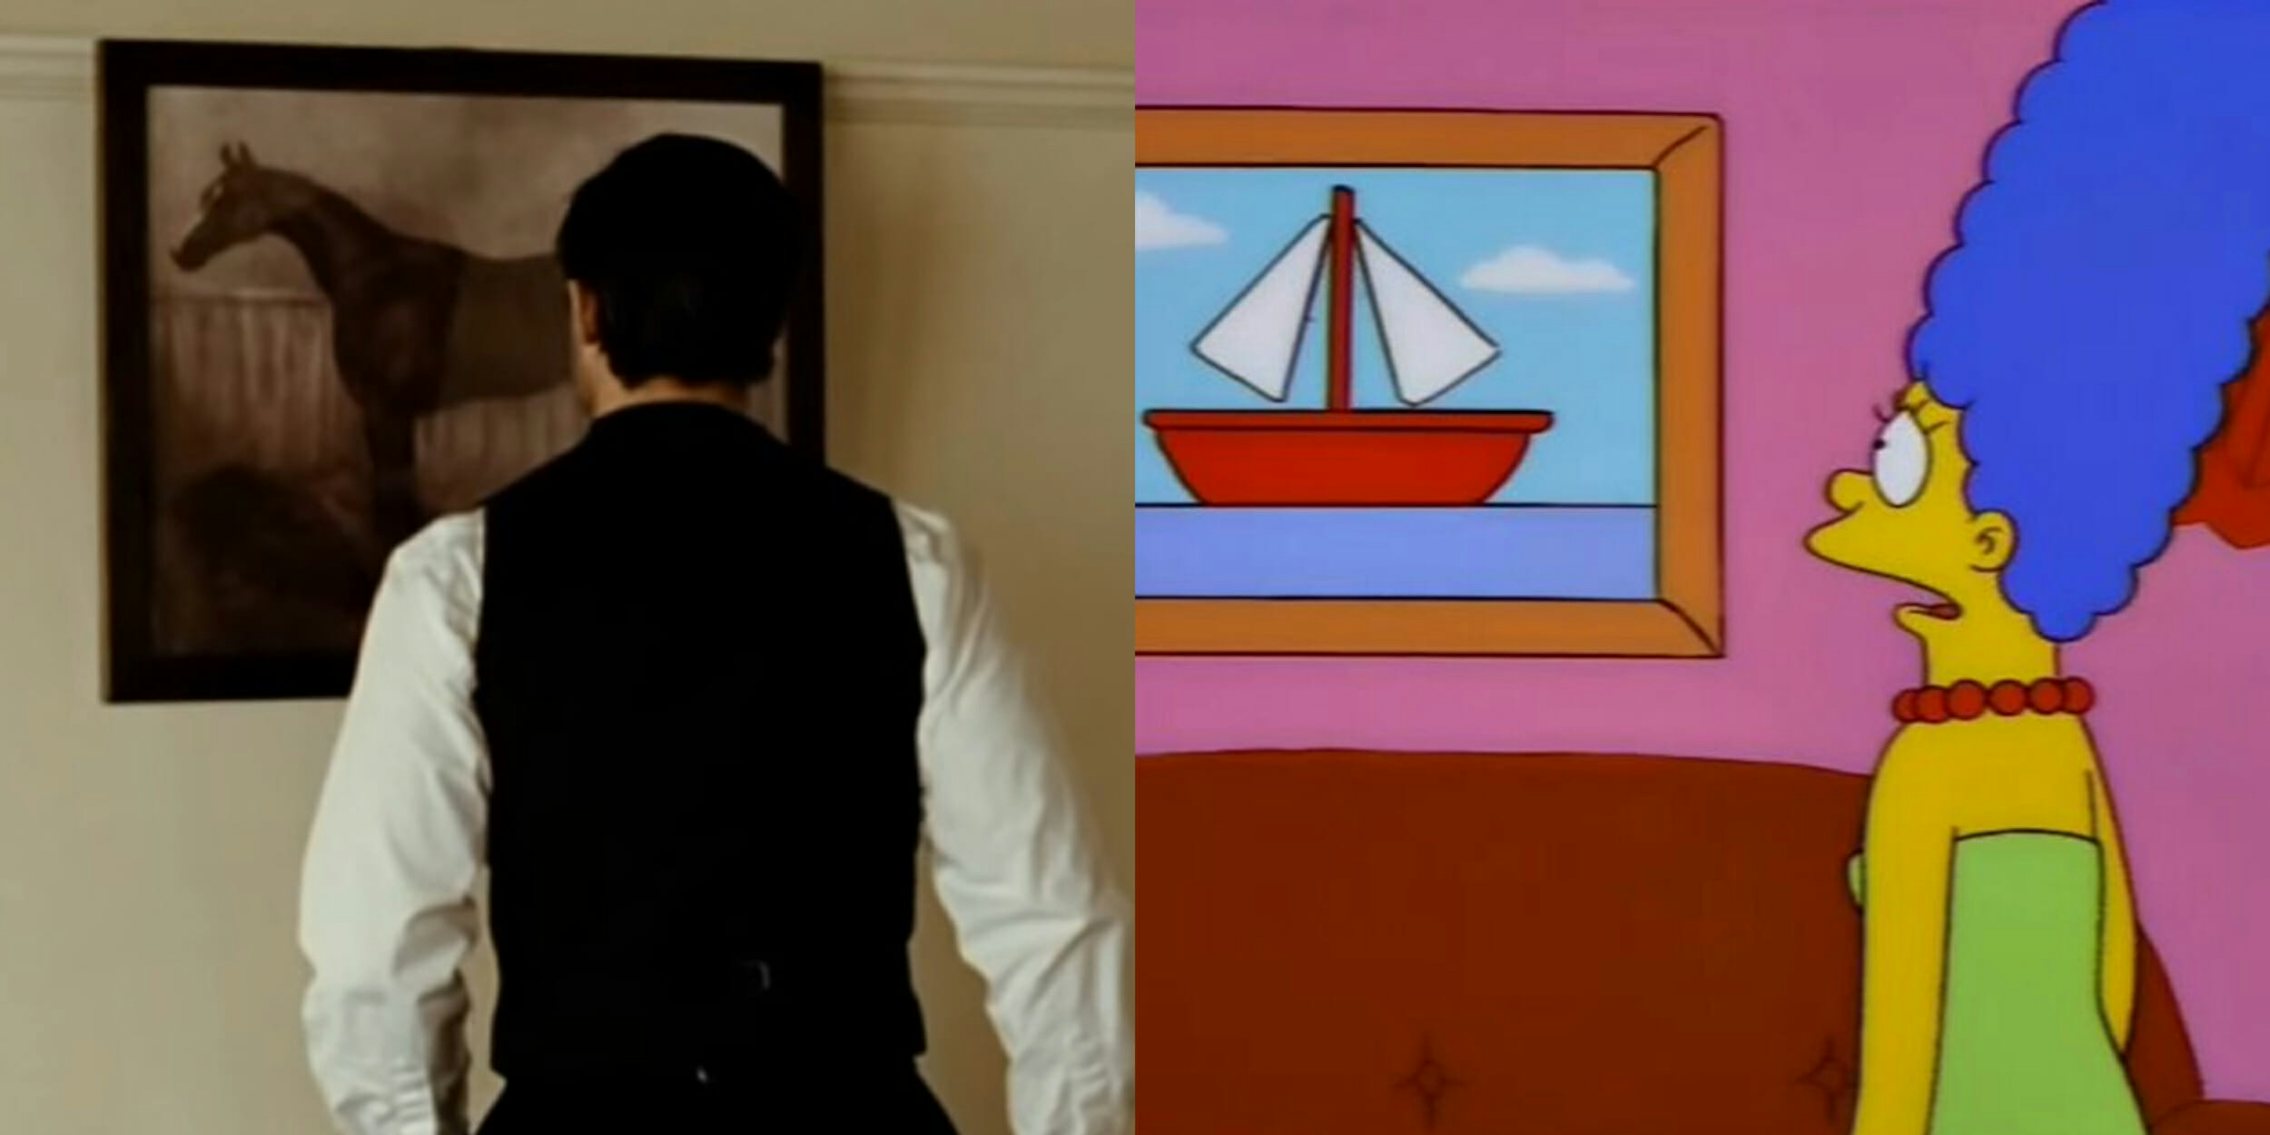 Brad Pitt as Jesse James looking at horse painting, Marge Simpson looking at a sailboat painting